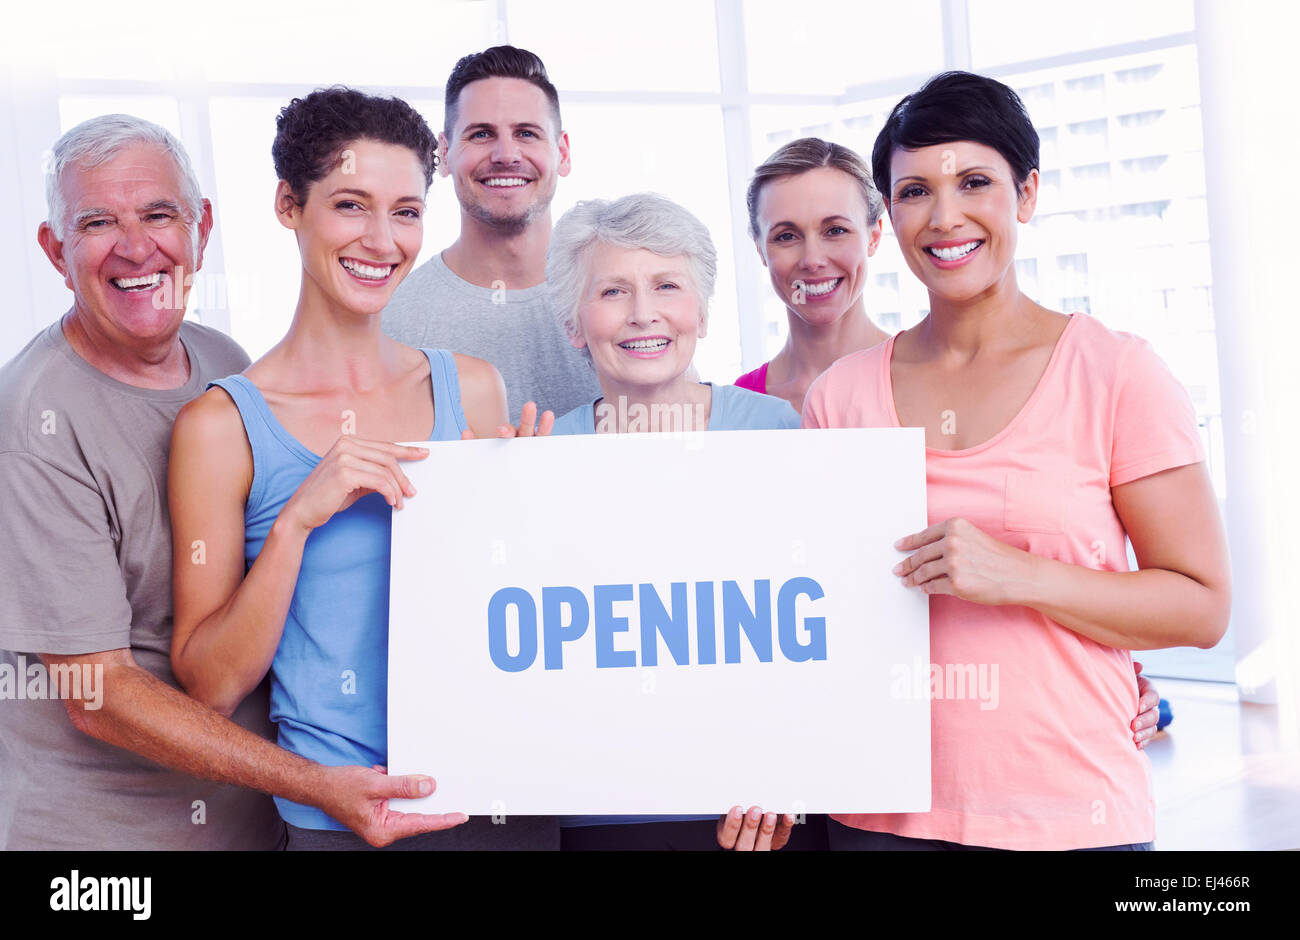 Opening against fit people holding blank board in yoga class Stock Photo